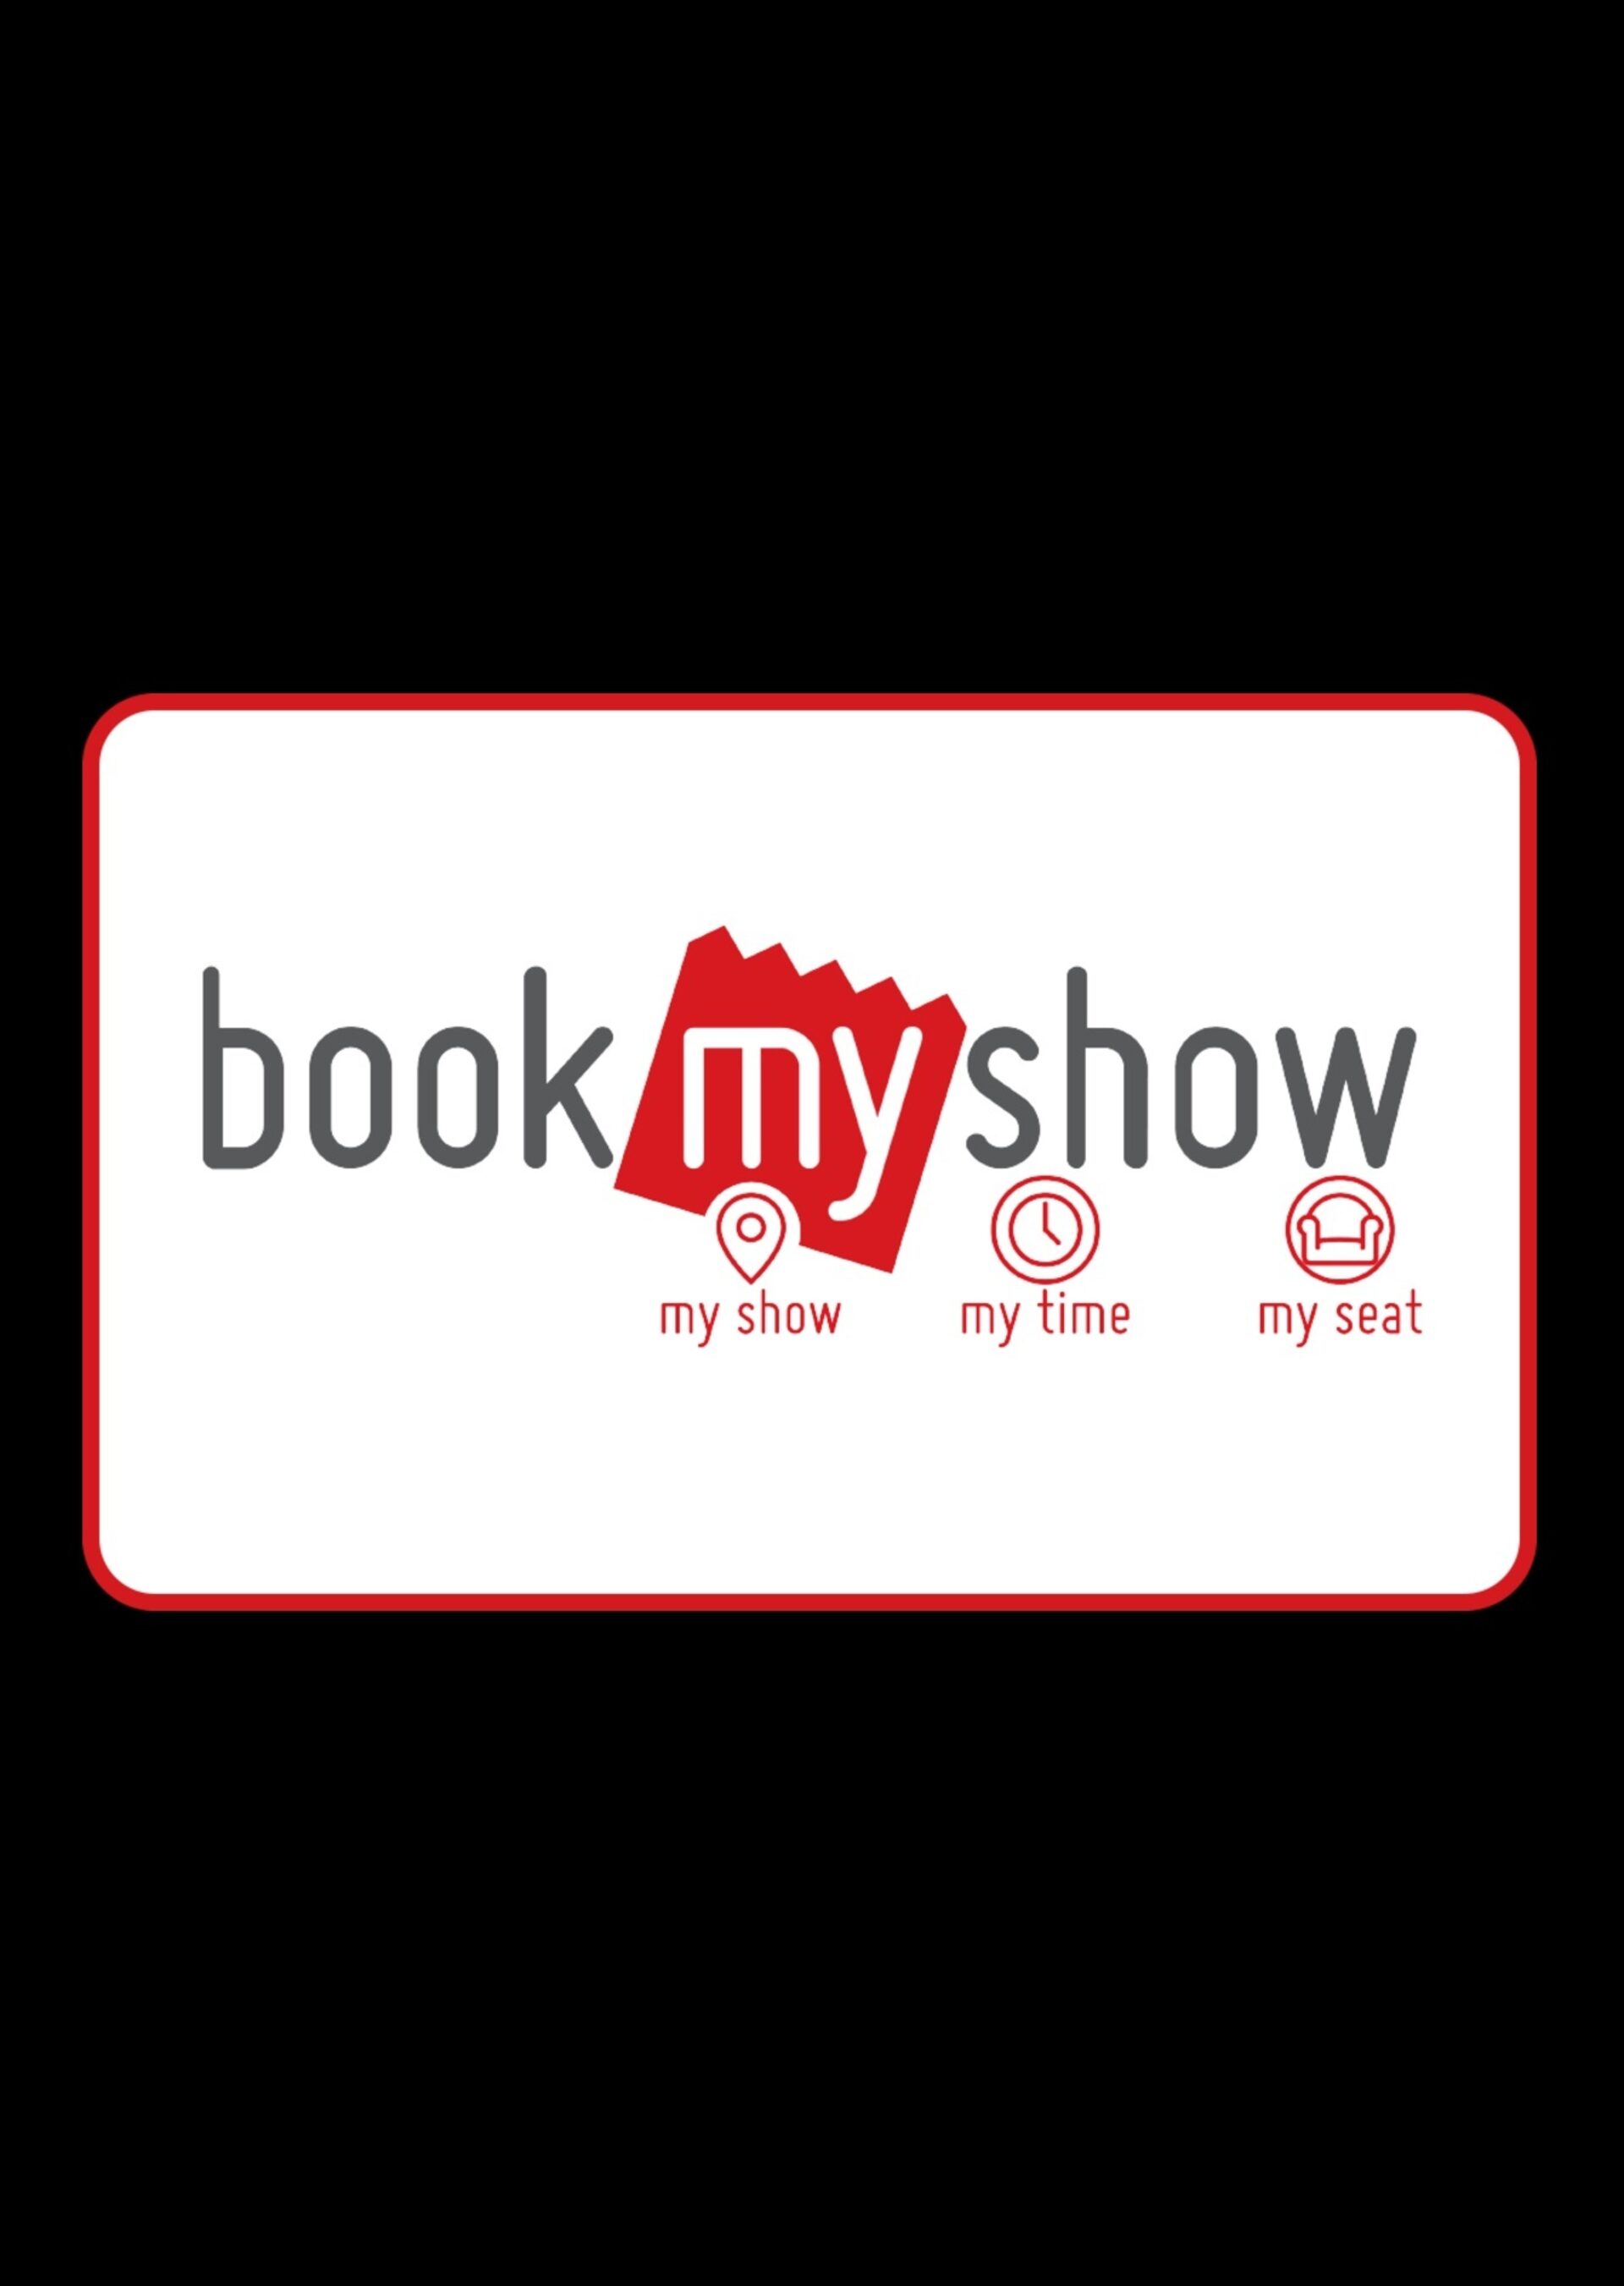 BookMyShow Credit Cards Offer: Free Movie Tickets, Discounts Online